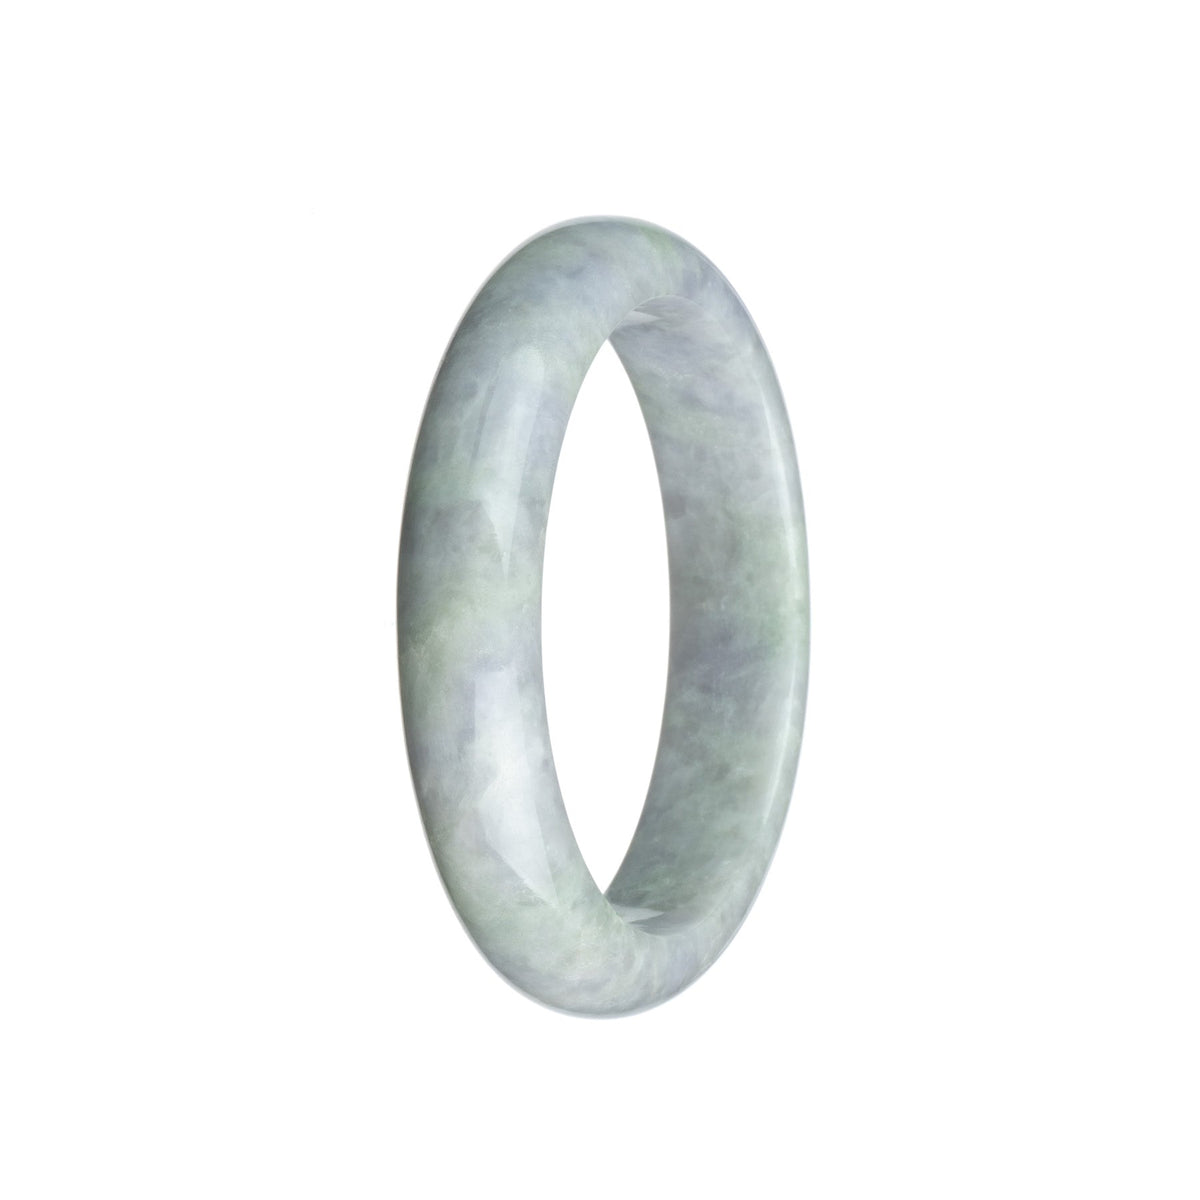 A lavender traditional jade bangle with a half moon shape, measuring 58mm, from MAYS GEMS.